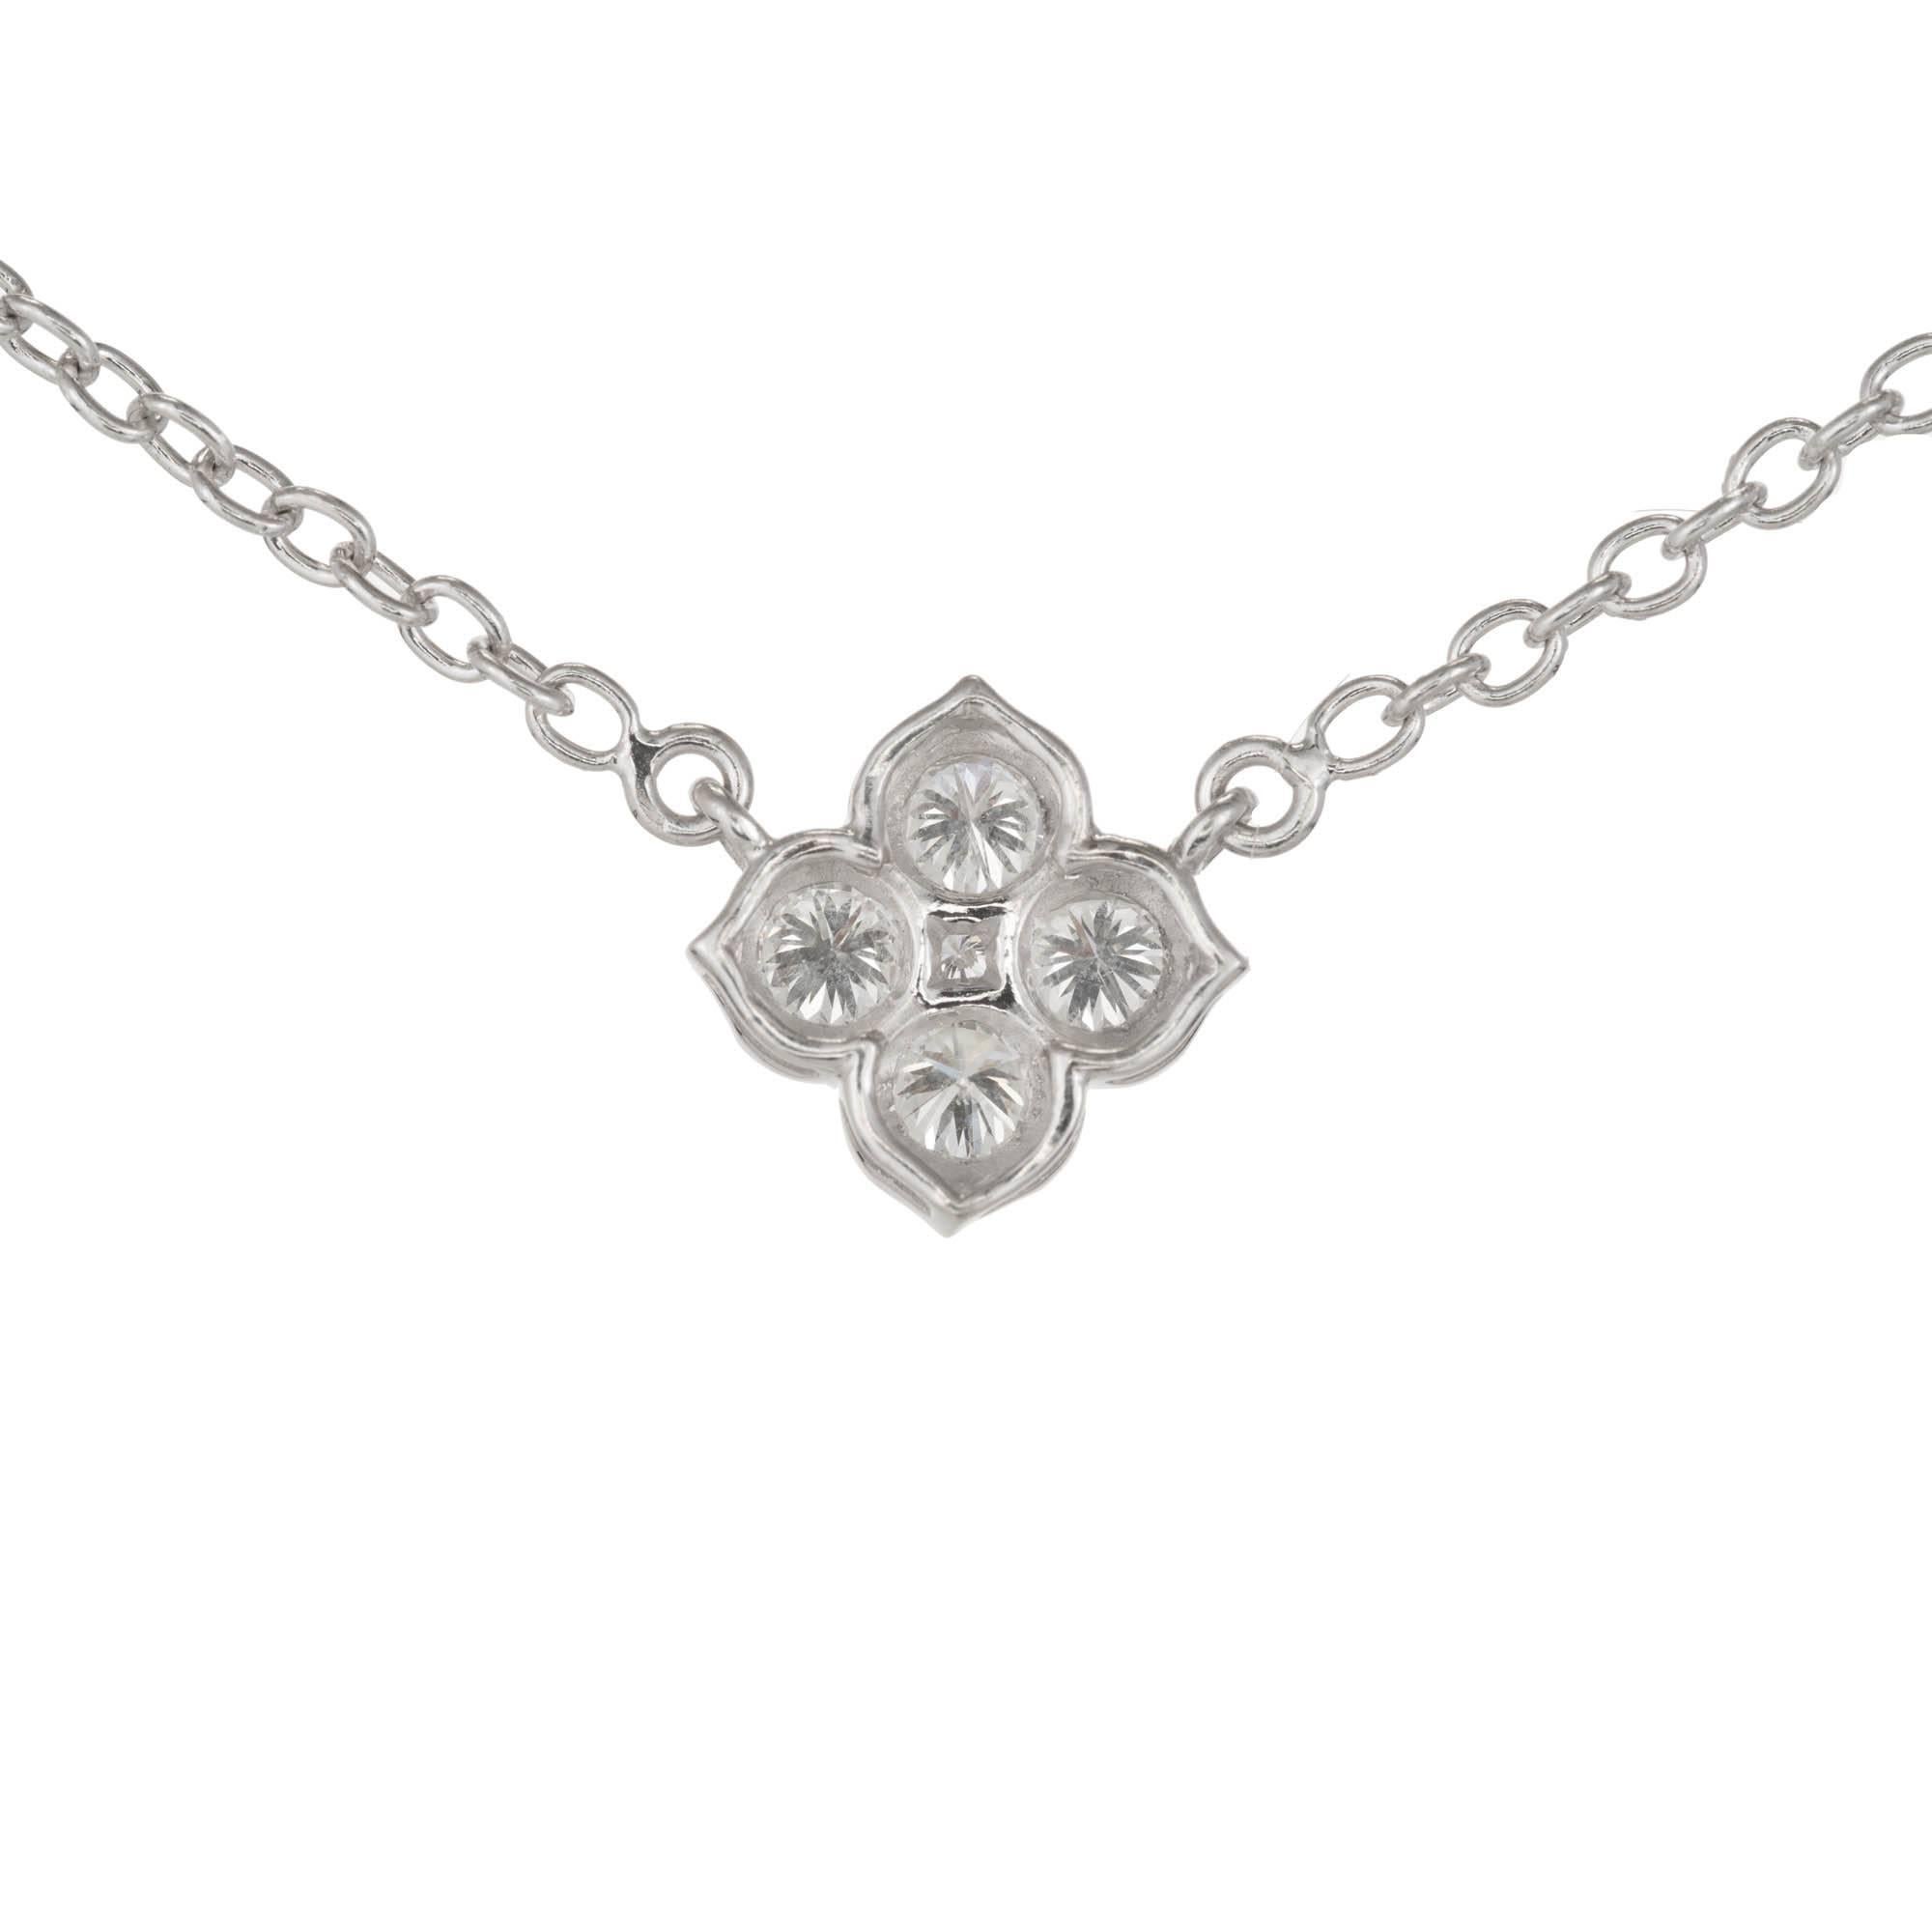 Cartier Hindu Diamond pendant necklace in 18k white gold with 4 bright sparkly Diamonds.

5 round full cut Diamonds, approx. total weight .50cts, F – G, VVS
18k white gold
Tested: 18k
Stamped: 750
Hallmark: Cartier XI TO 134672
4.6 grams
Length: 16